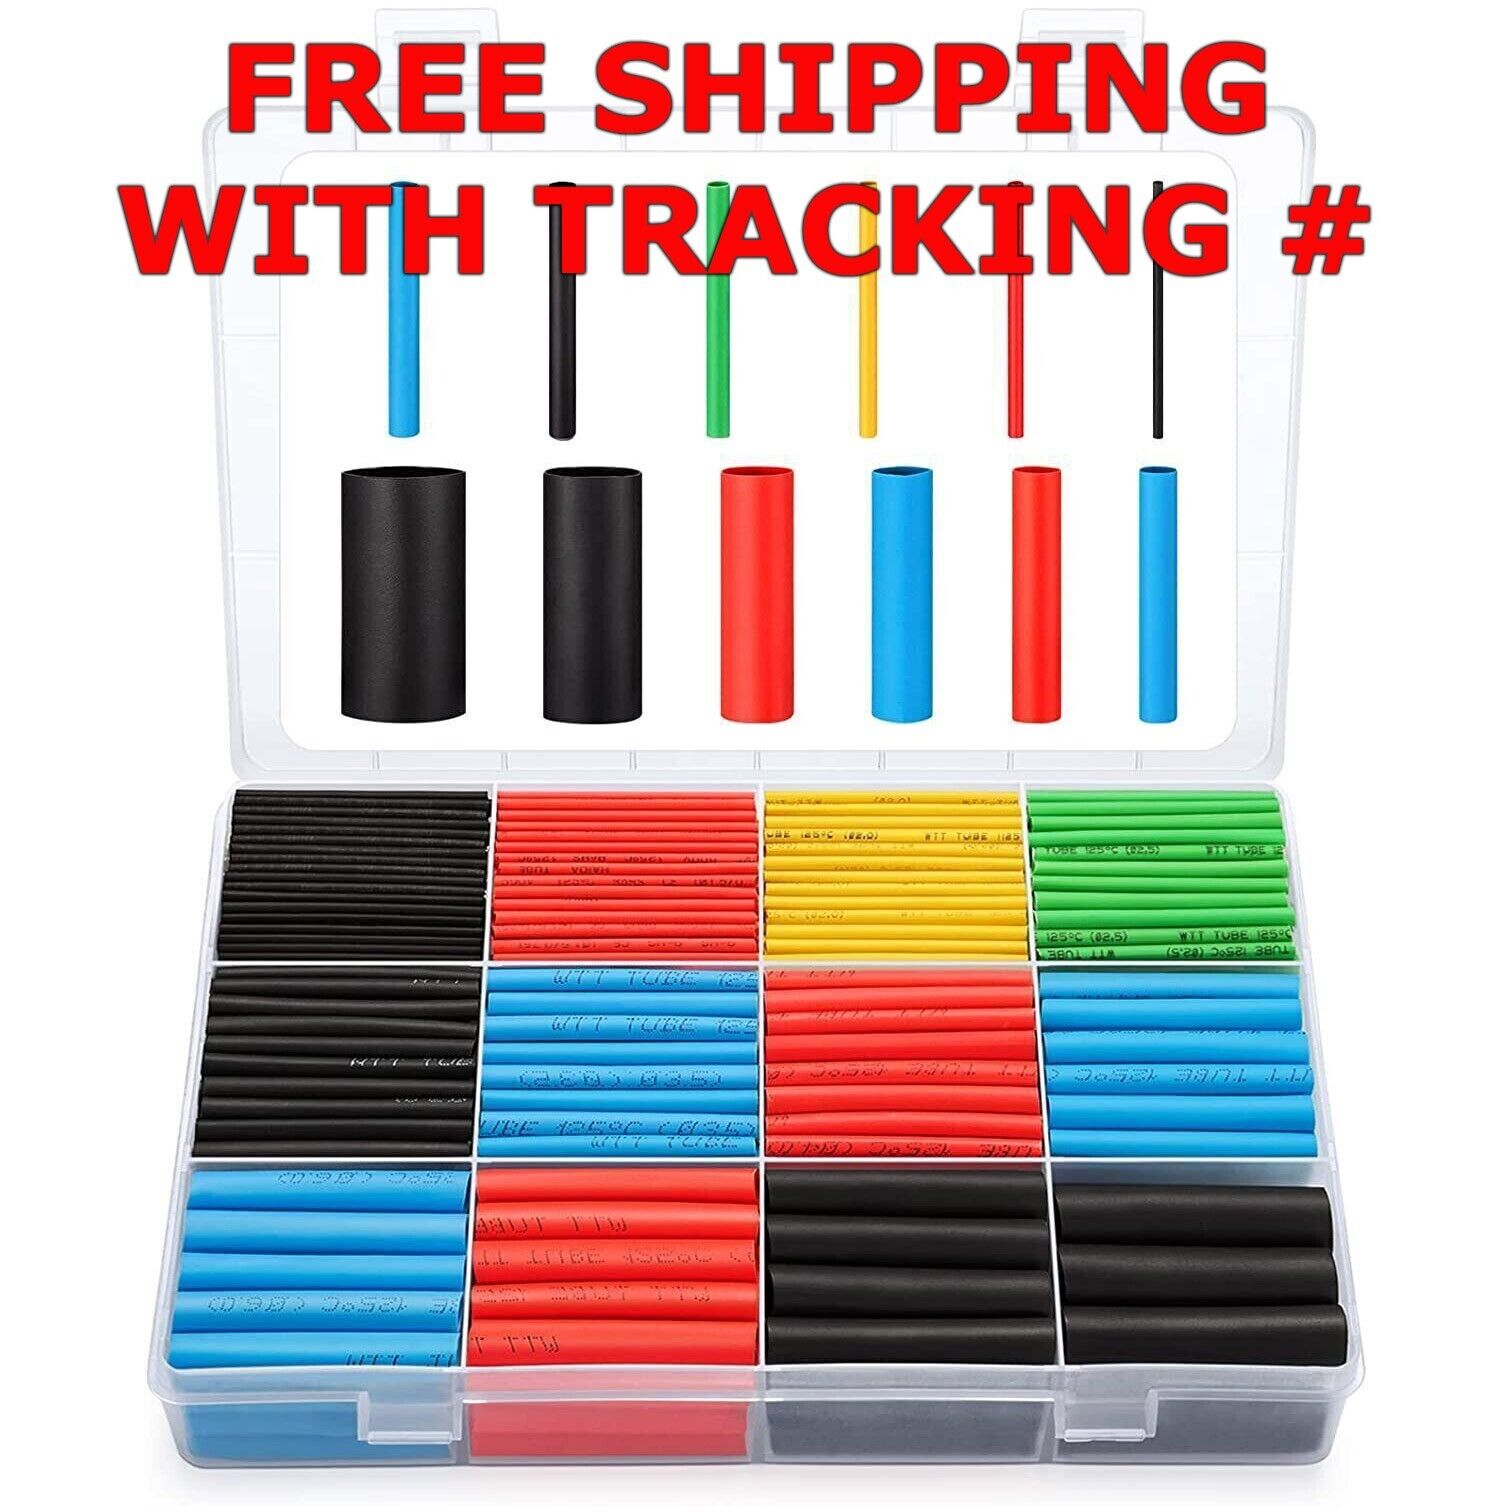 560Pcs HEAT SHRINK Tubing Insulation Shrinkable Tube 2:1 Wire Cable Sleeve W BOX